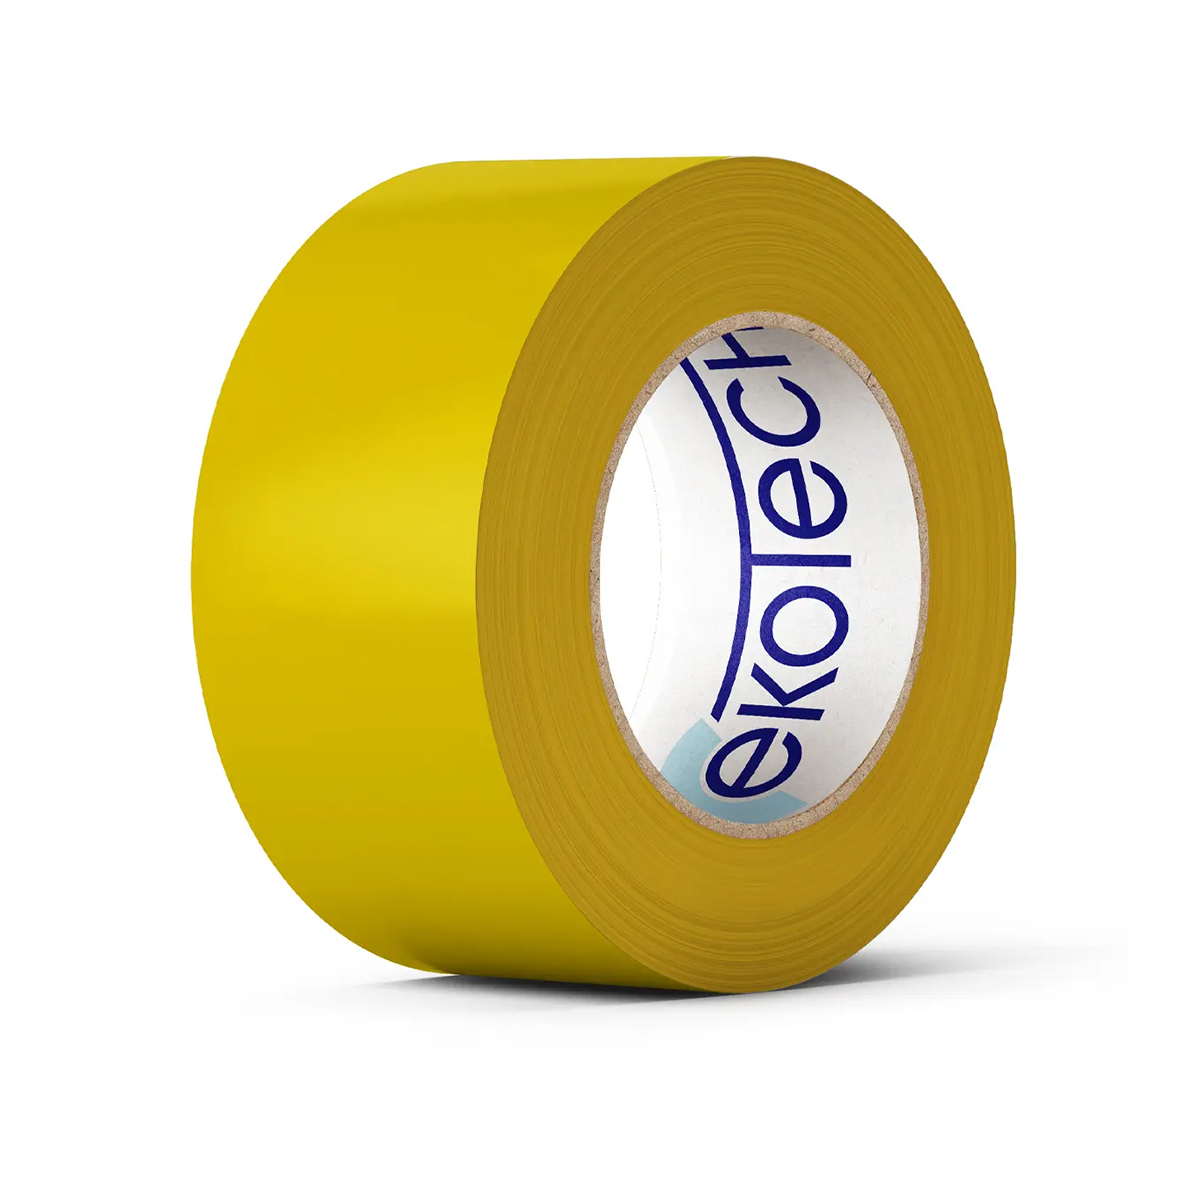 Nonwoven tapes